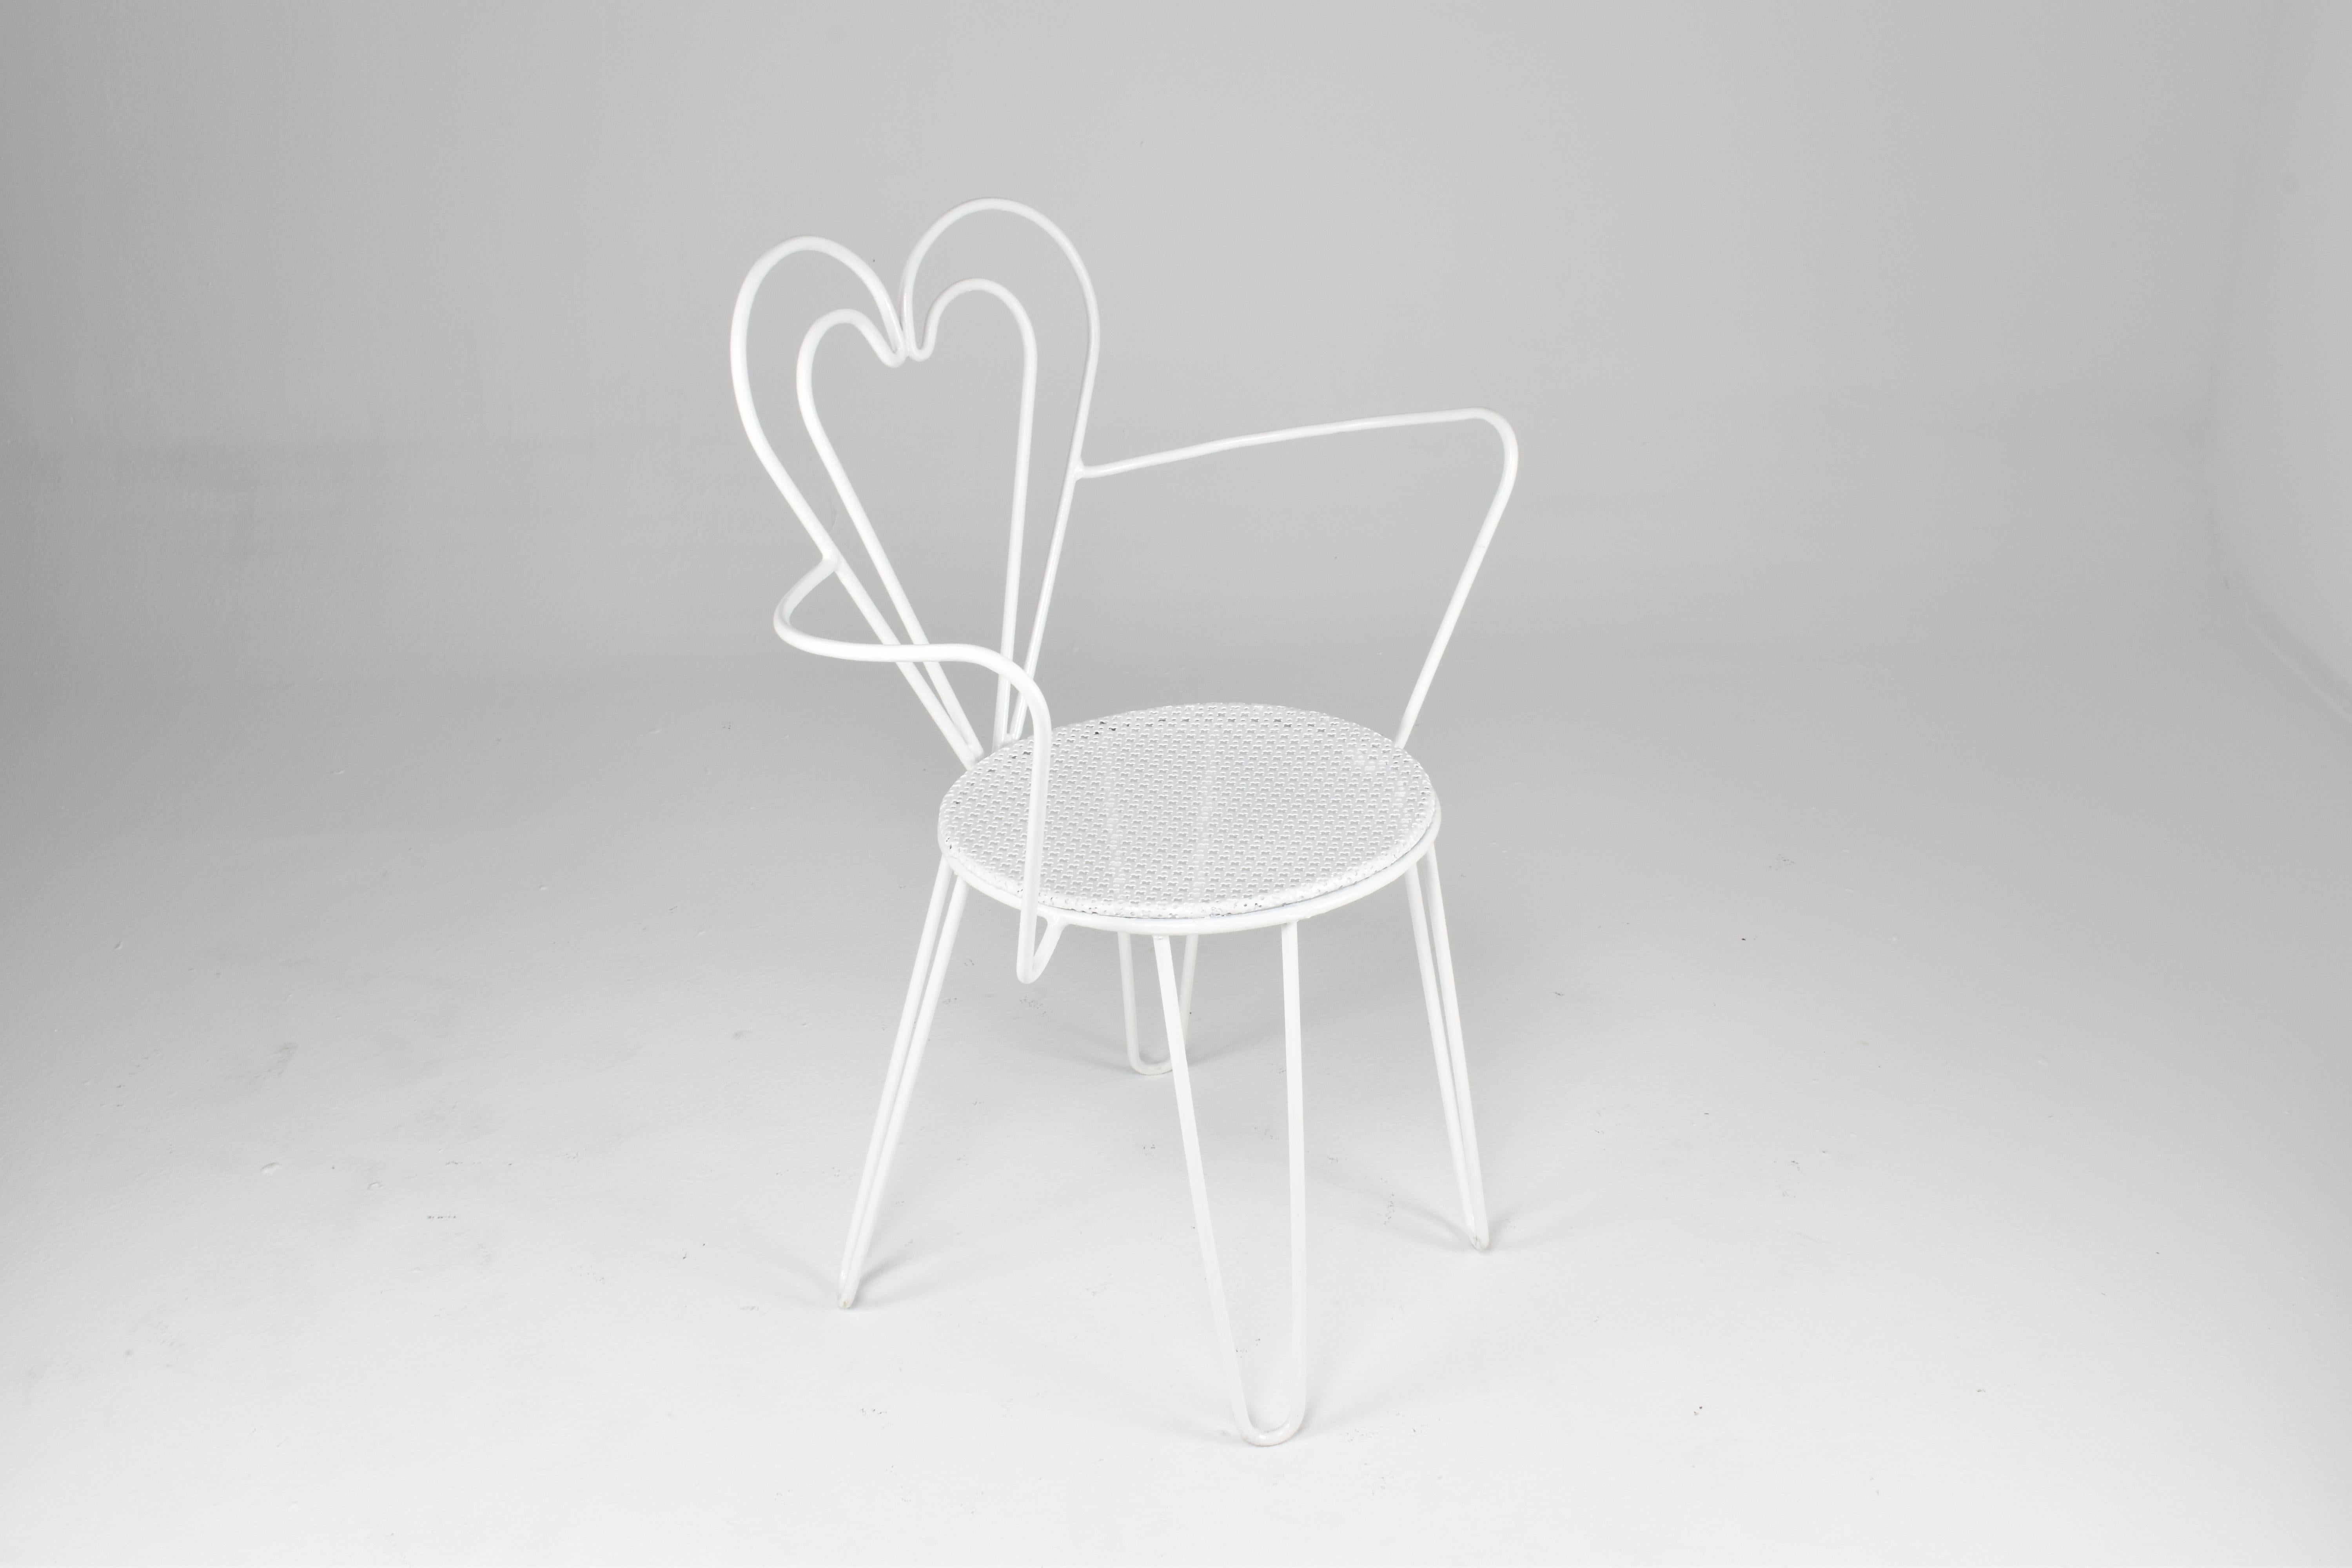 French Metal Heart Chairs by Mathieu Matégot, 1950s For Sale 2